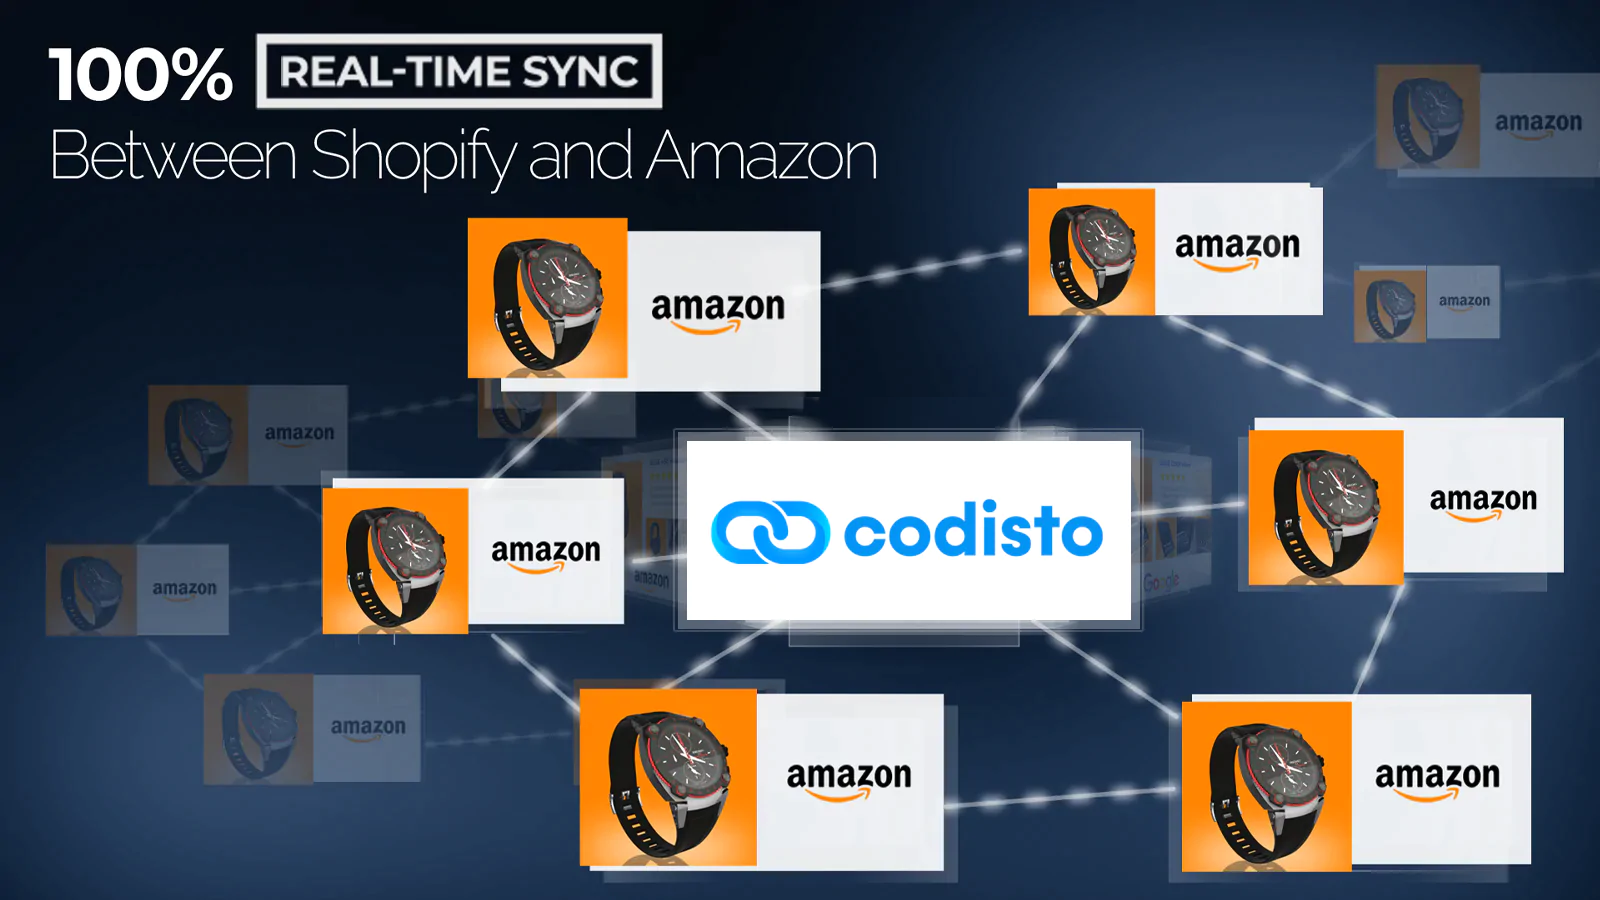 Real-time sync between Shopify and Amazon